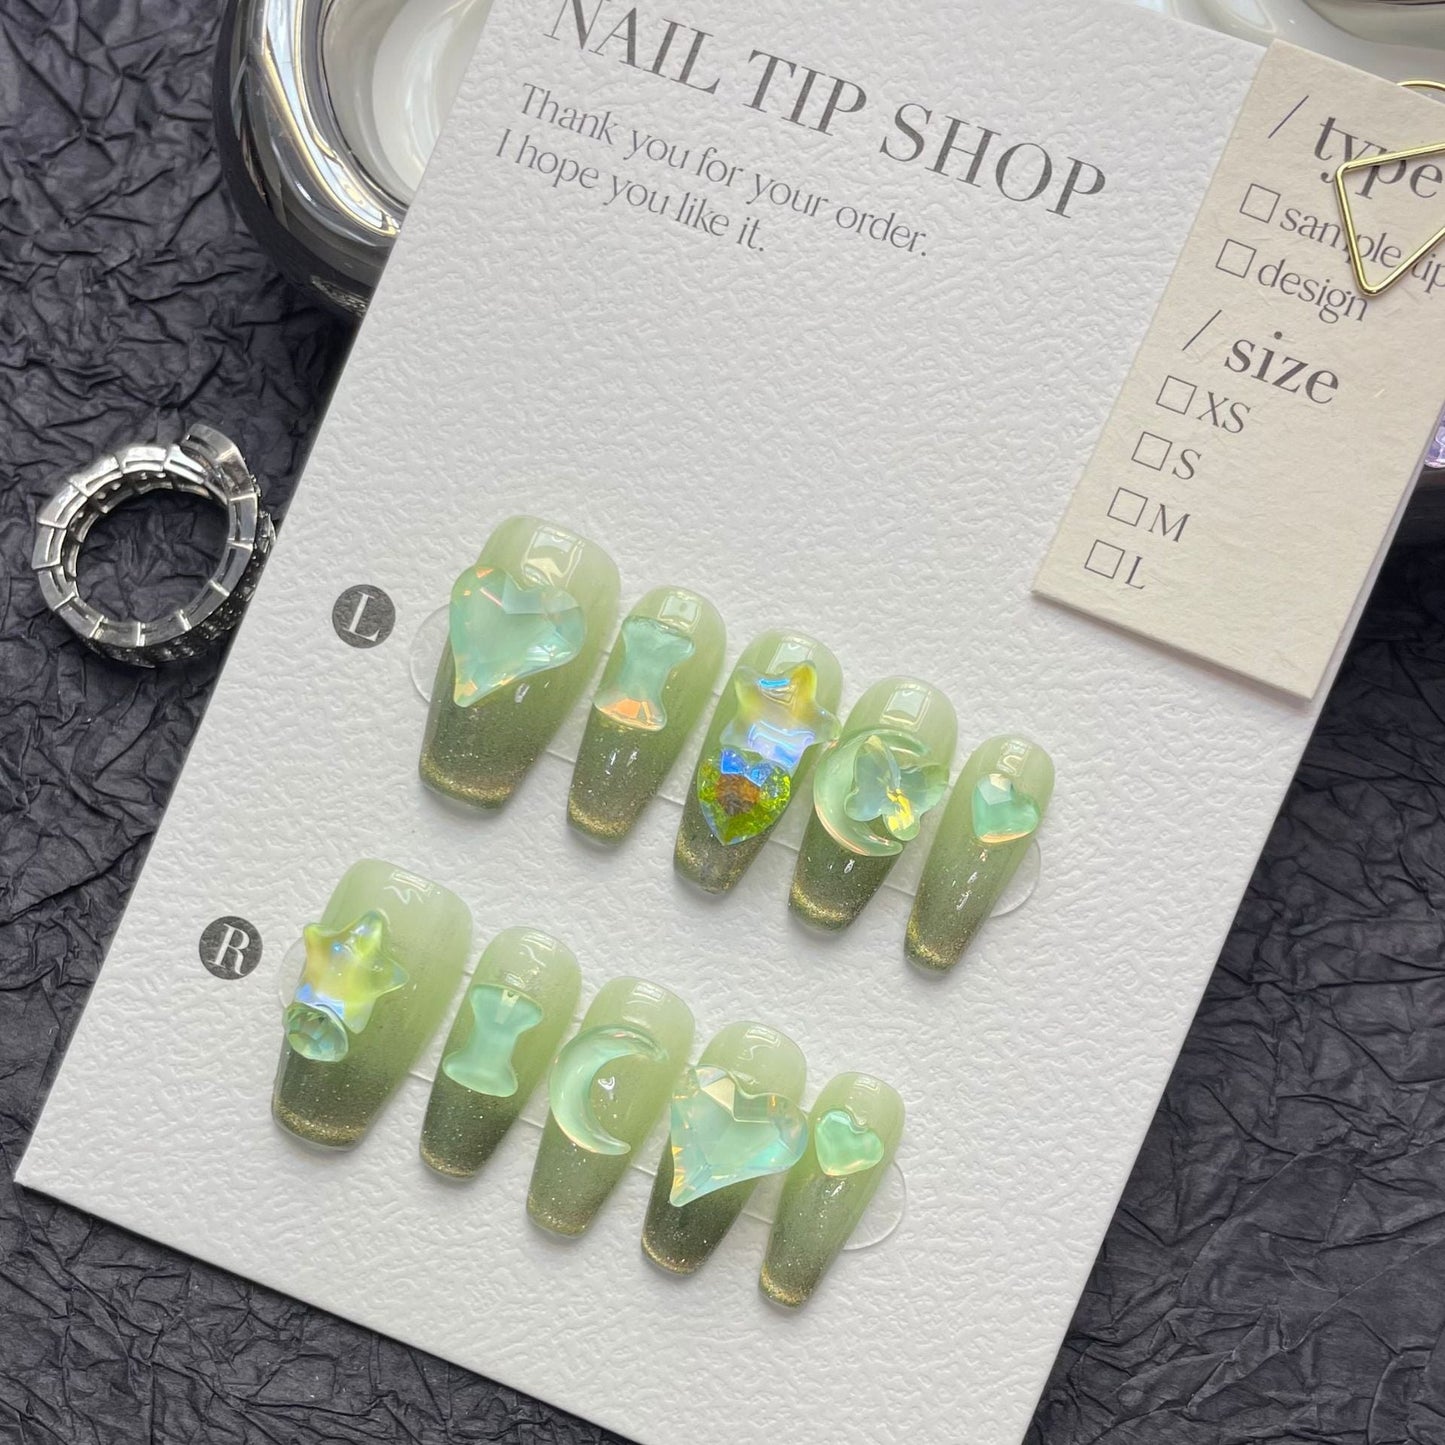 1229 The Wizard of Oz style press on nails 100% handmade false nails green